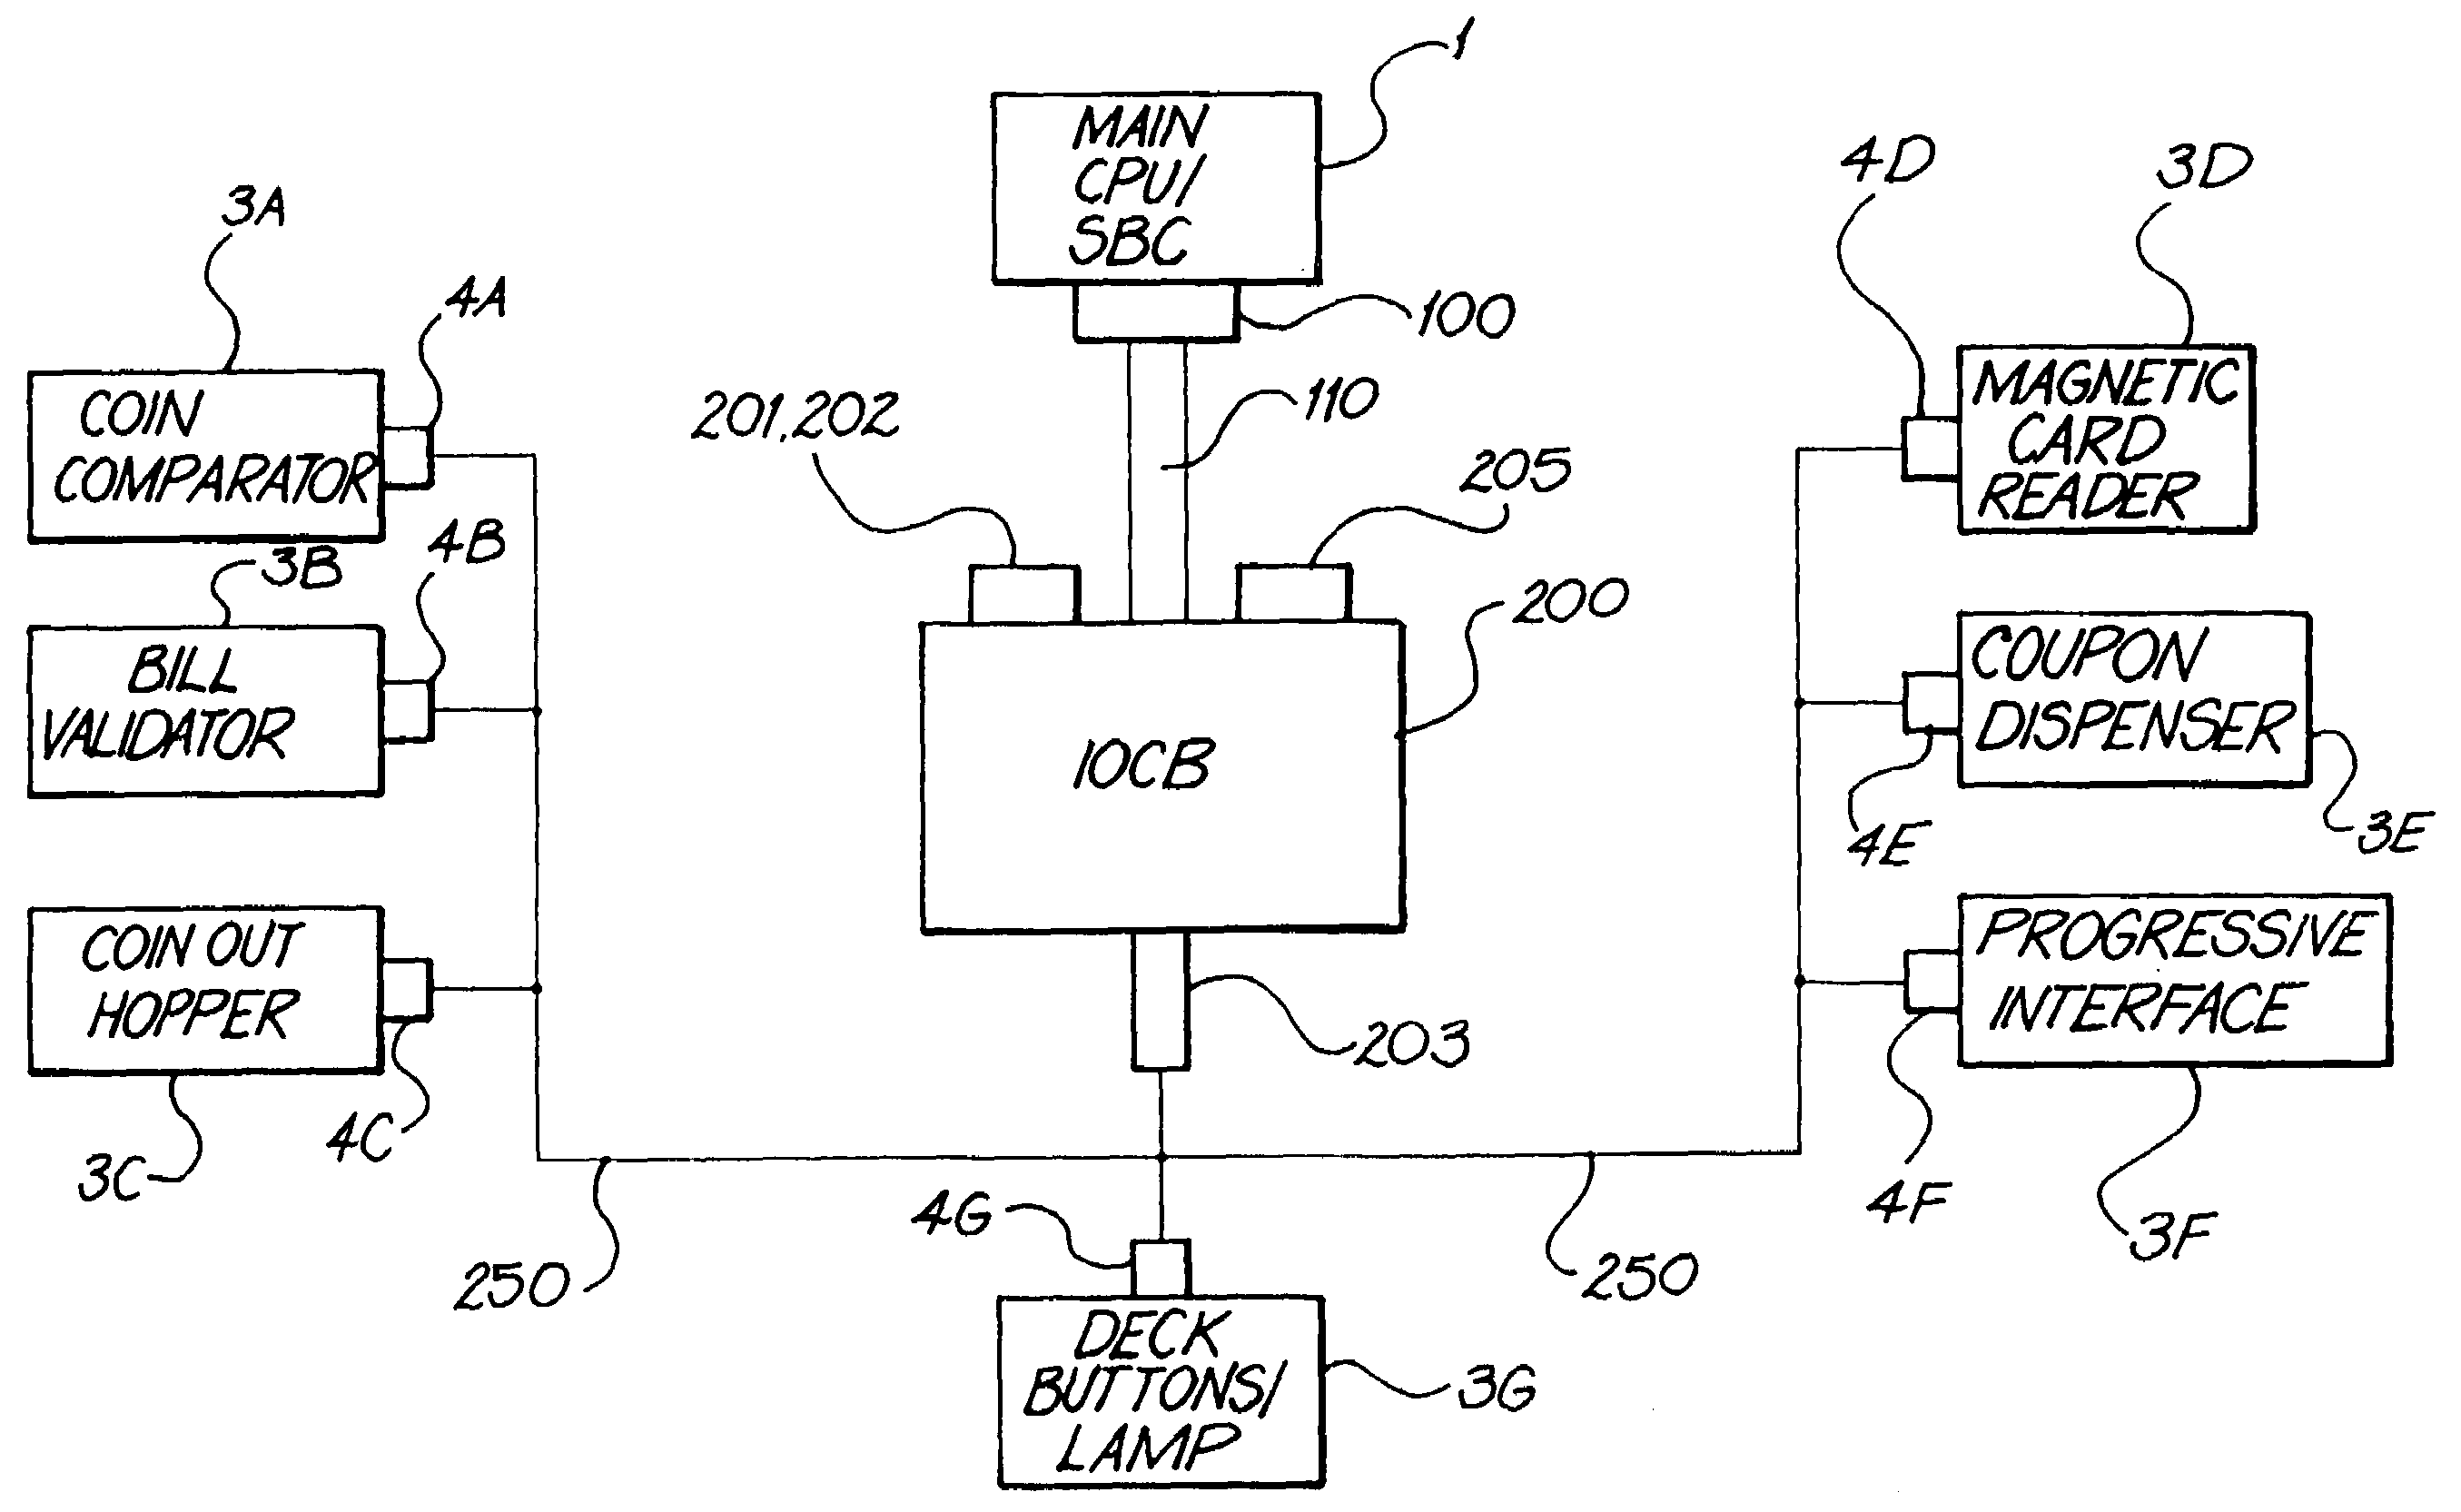 Secured inter-processor and virtual device communications system for use in a gaming system